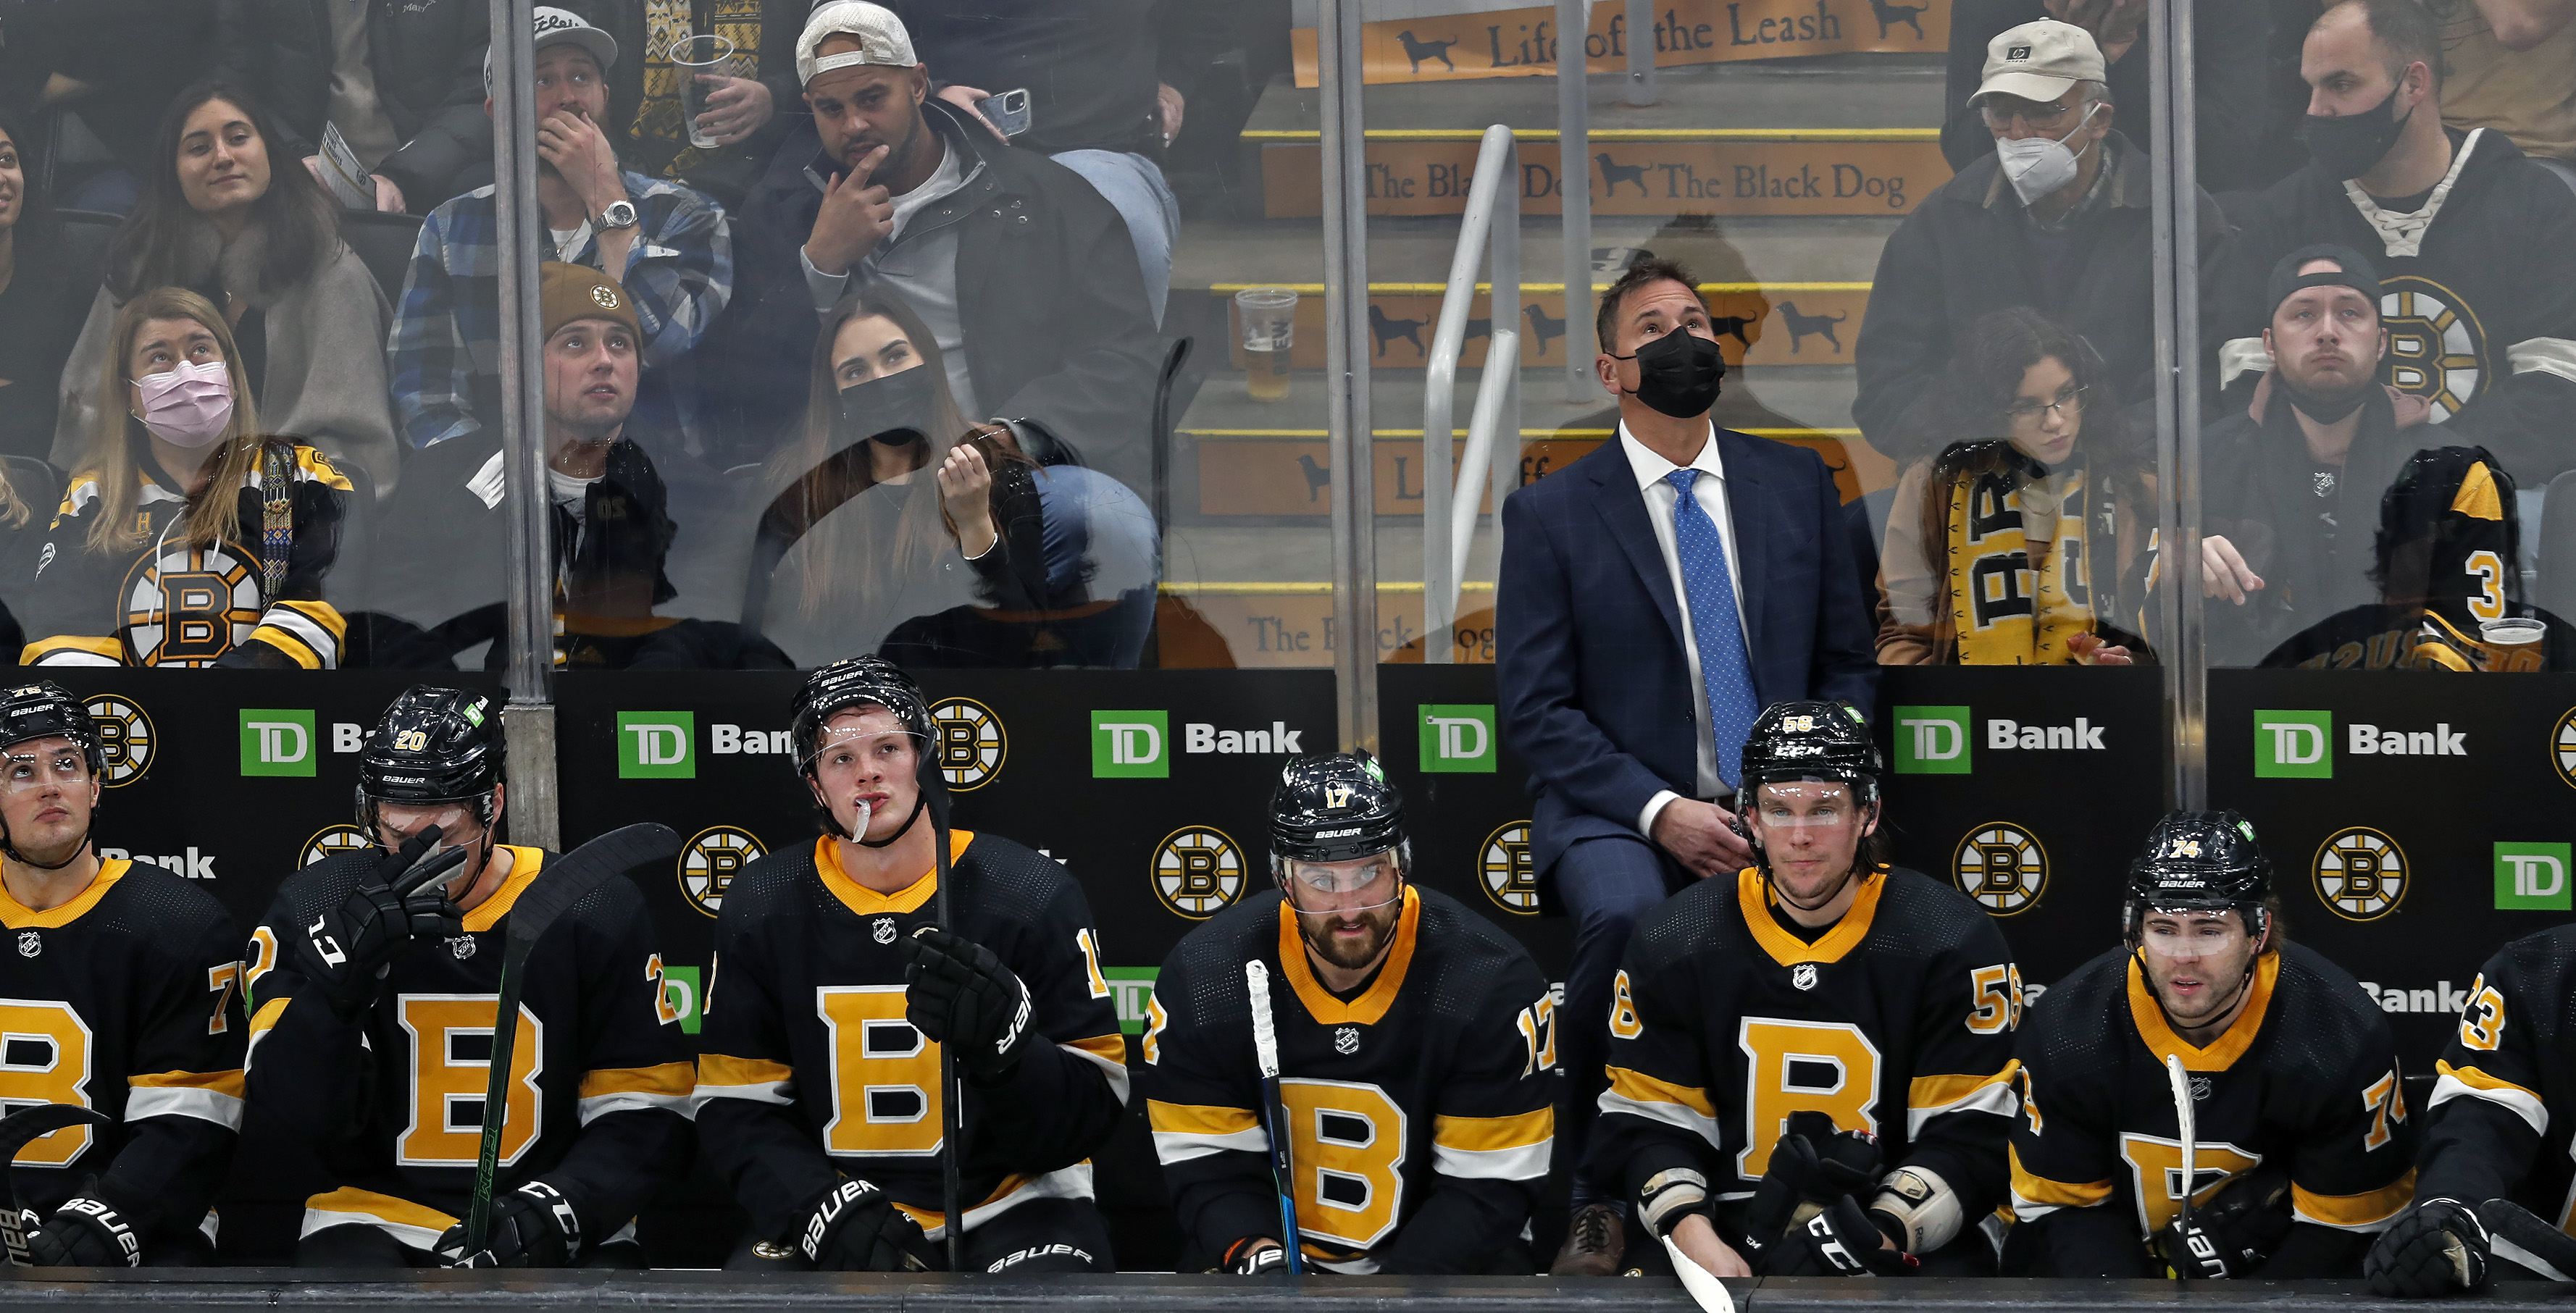 Bruce Cassidy, as well as players and fans, react to the replay of the goal that Vegas scored in the final second of the first period to go ahead 3-0 Tuesday night at TD Garden.